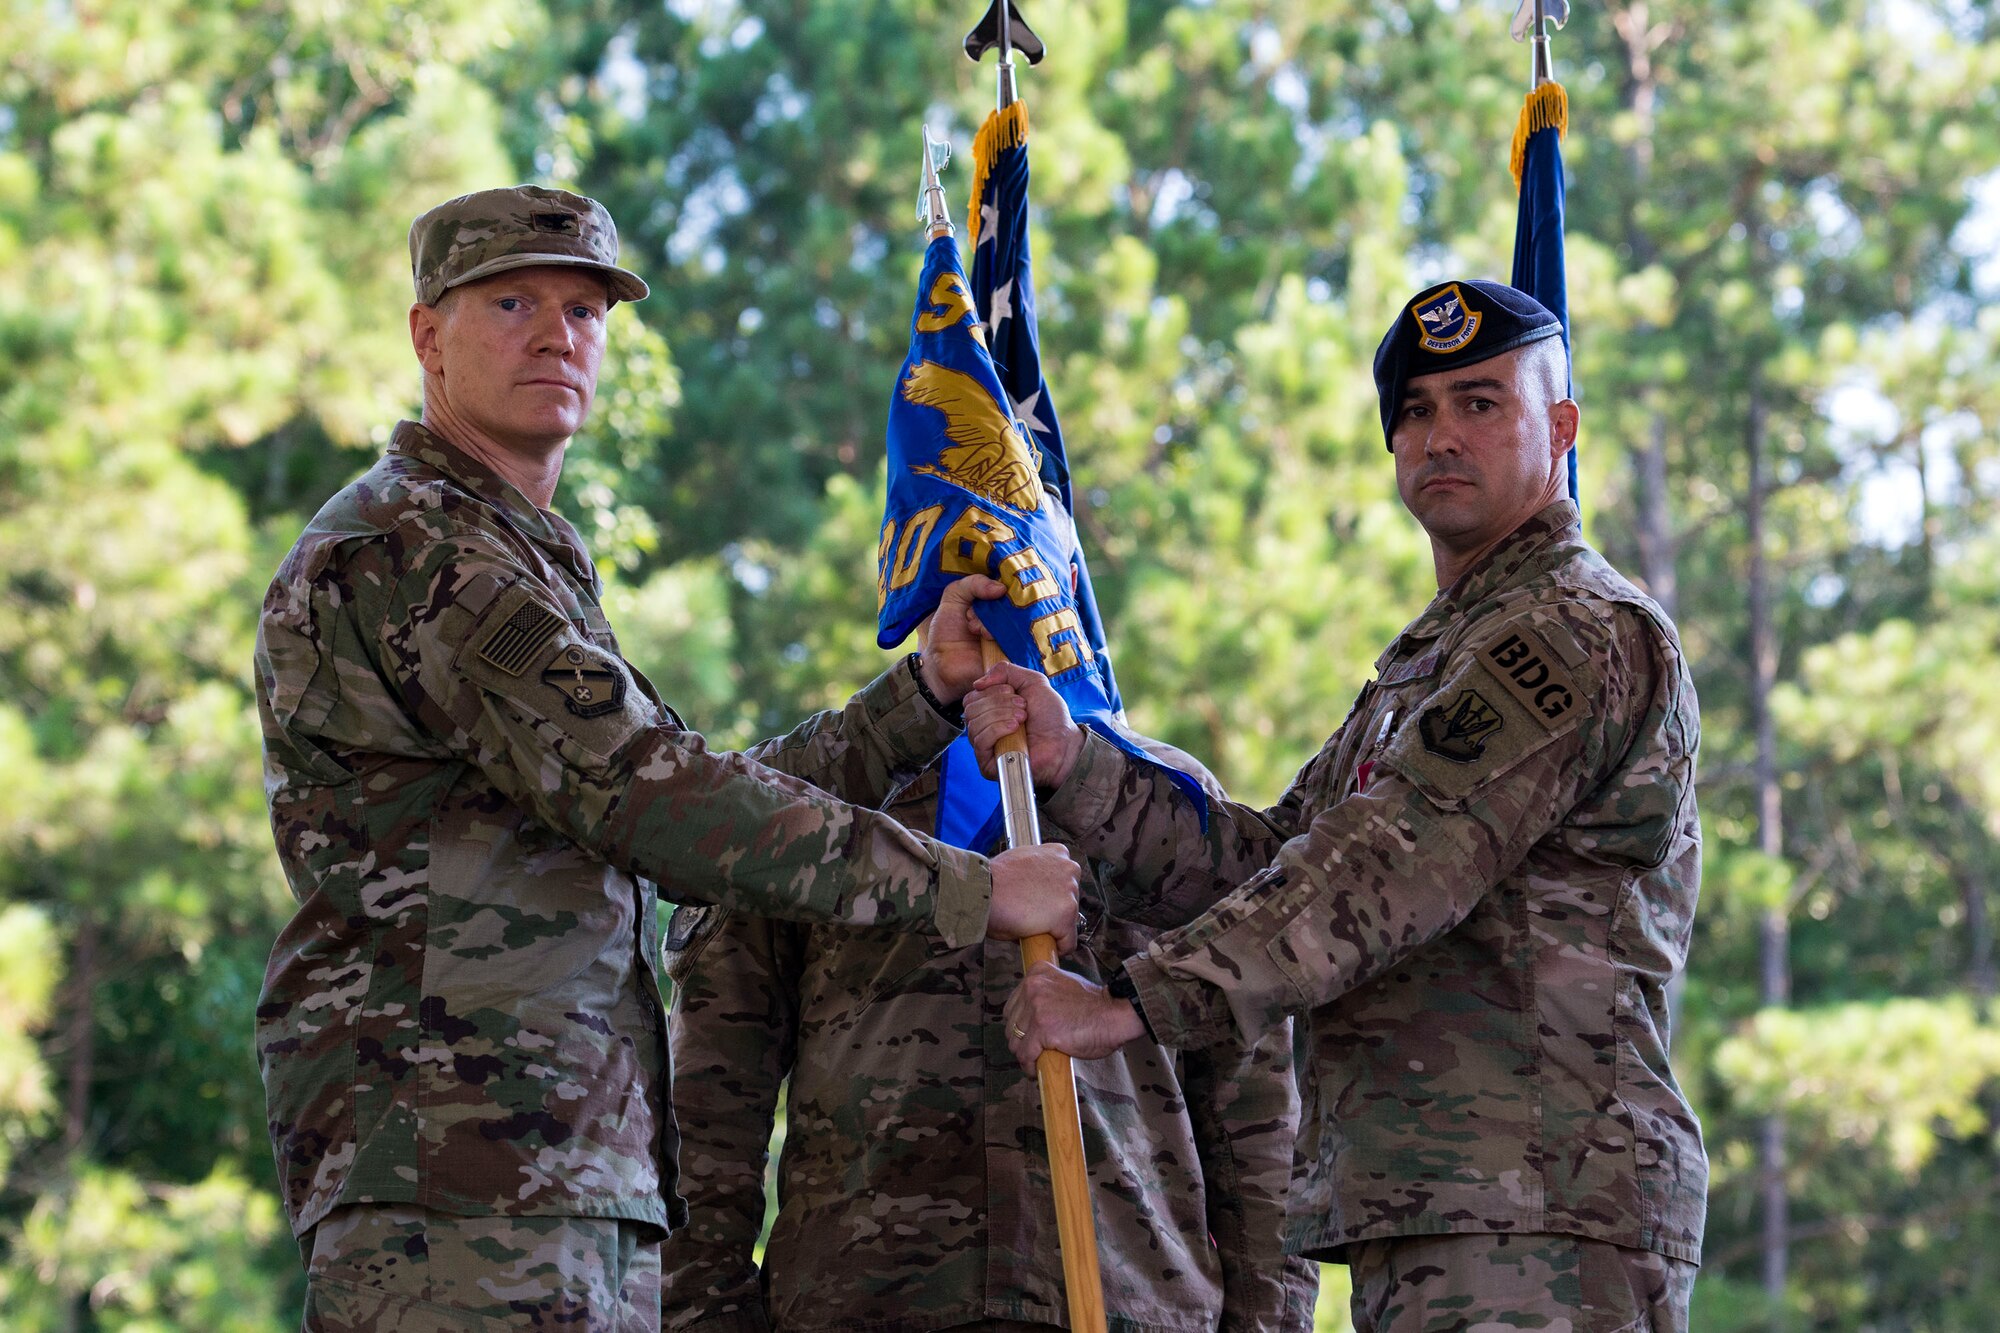 Col. Paul Birch, left, 93d Air Ground Operations Wing commander, and Col. Kevin Walker, 820th Base Defense Group (BDG) outgoing commander, pose for a photo during at change of command ceremony, July 12, 2018, a Moody Air Force Base, Ga. The ceremony represents the formal passing of responsibility, authority and accountability of command from one officer to another. Col. Benito Barron, 820th BDG commander, who recently relinquished his duties as the Chief of the Homeland Defense and Protection Division for Headquarters United States Northern Command, will now command the 820th BDG. The 820th BDG is the Air Force’s only unit specifically designed to provide fully integrated defense operations. (U.S. Air Force photo by Airman 1st Class Erick Requadt)